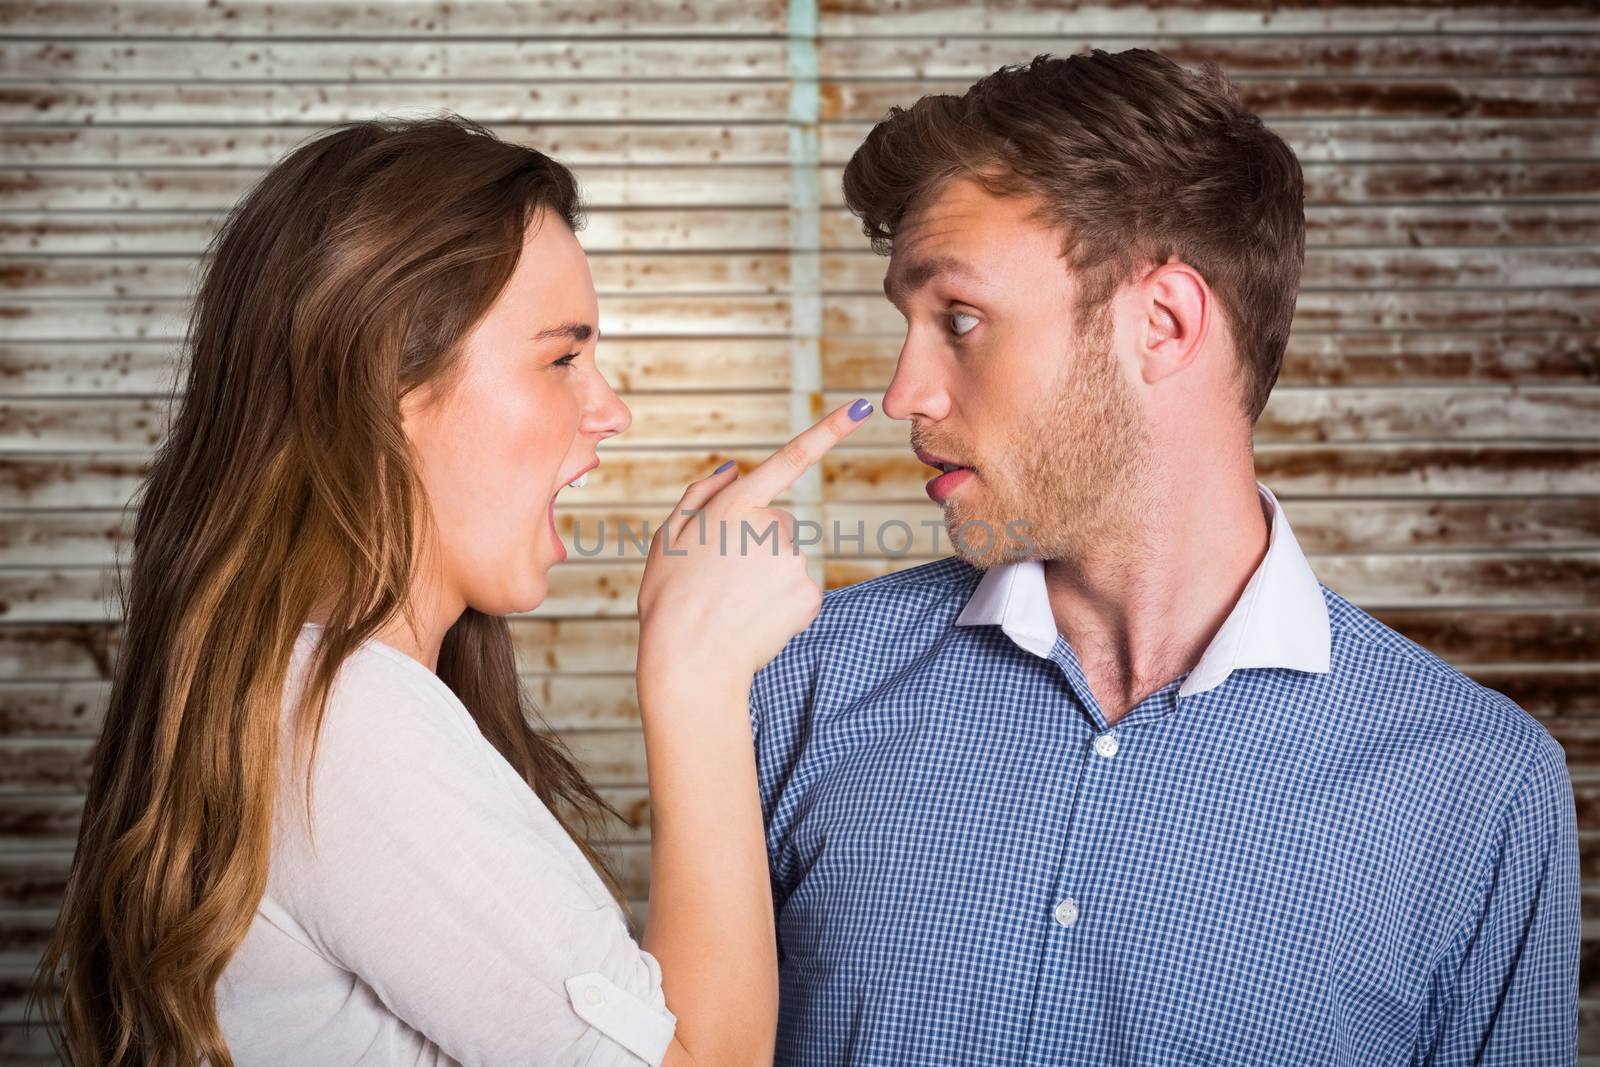 Casual young couple in an argument against wooden planks